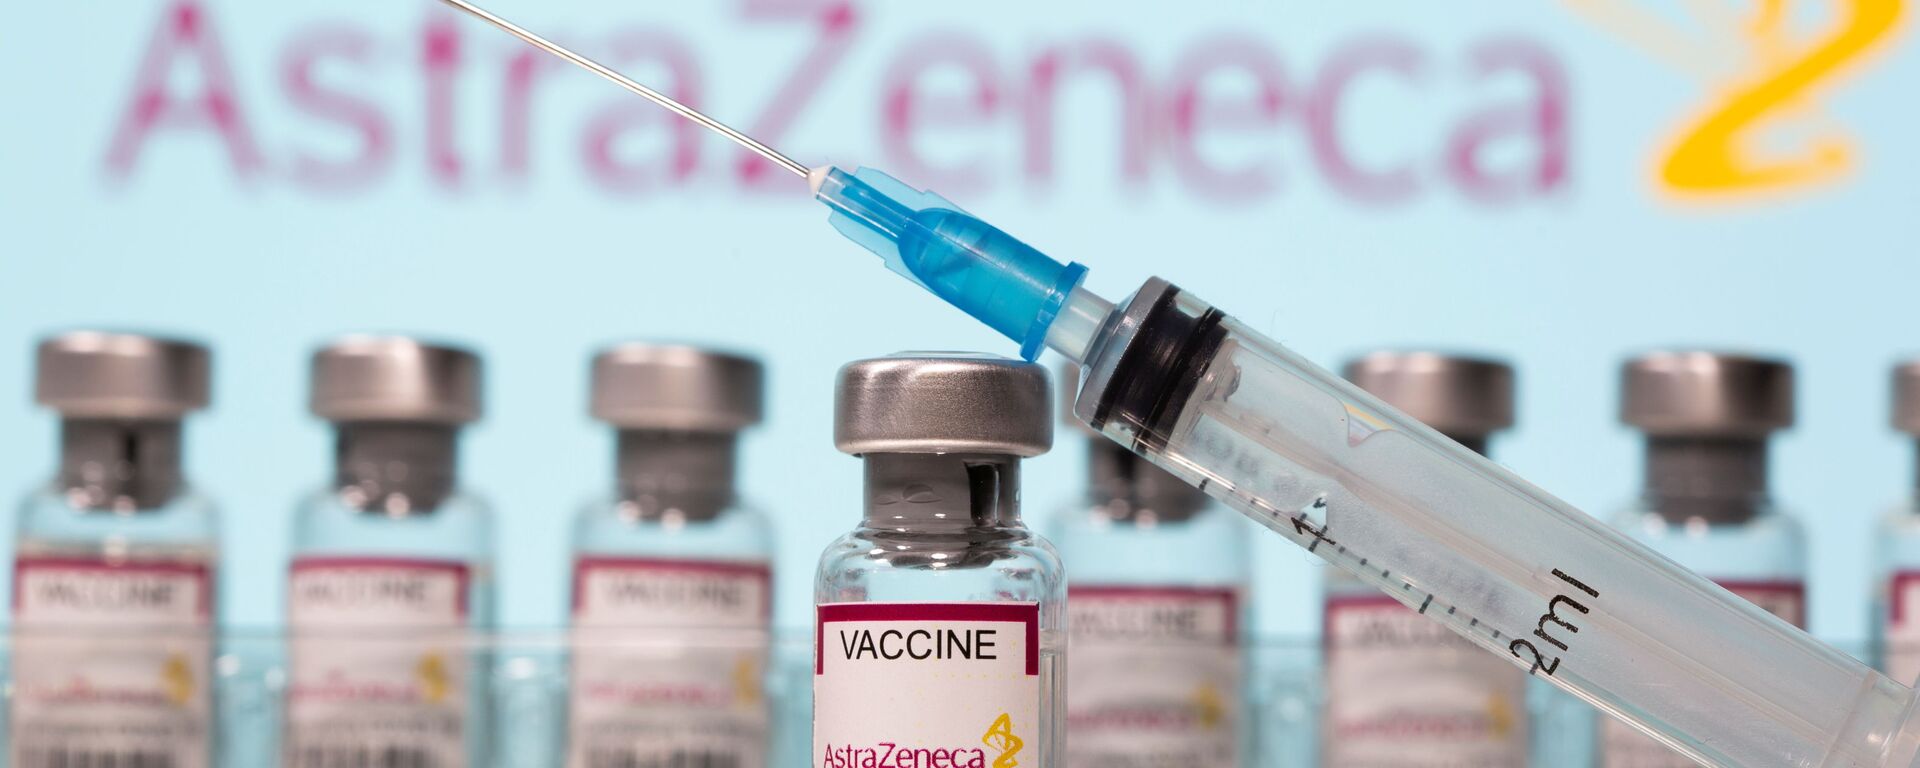 Vials labelled AstraZeneca COVID-19 Coronavirus Vaccine and a syringe are seen in front of a displayed AstraZeneca logo in this illustration taken March 10, 2021. REUTERS/Dado Ruvic/Illustration - Sputnik International, 1920, 30.03.2021